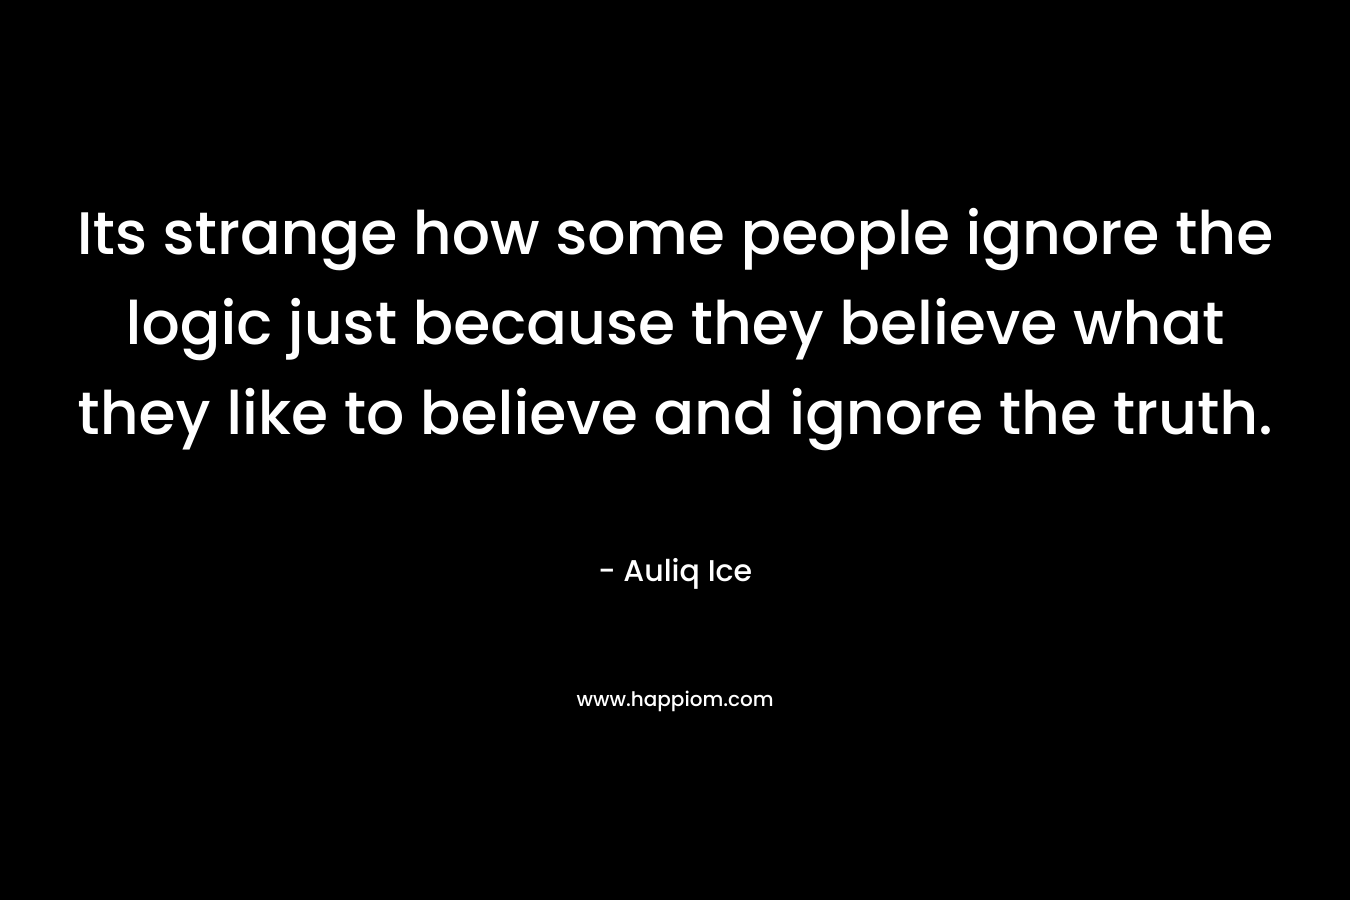 Its strange how some people ignore the logic just because they believe what they like to believe and ignore the truth.